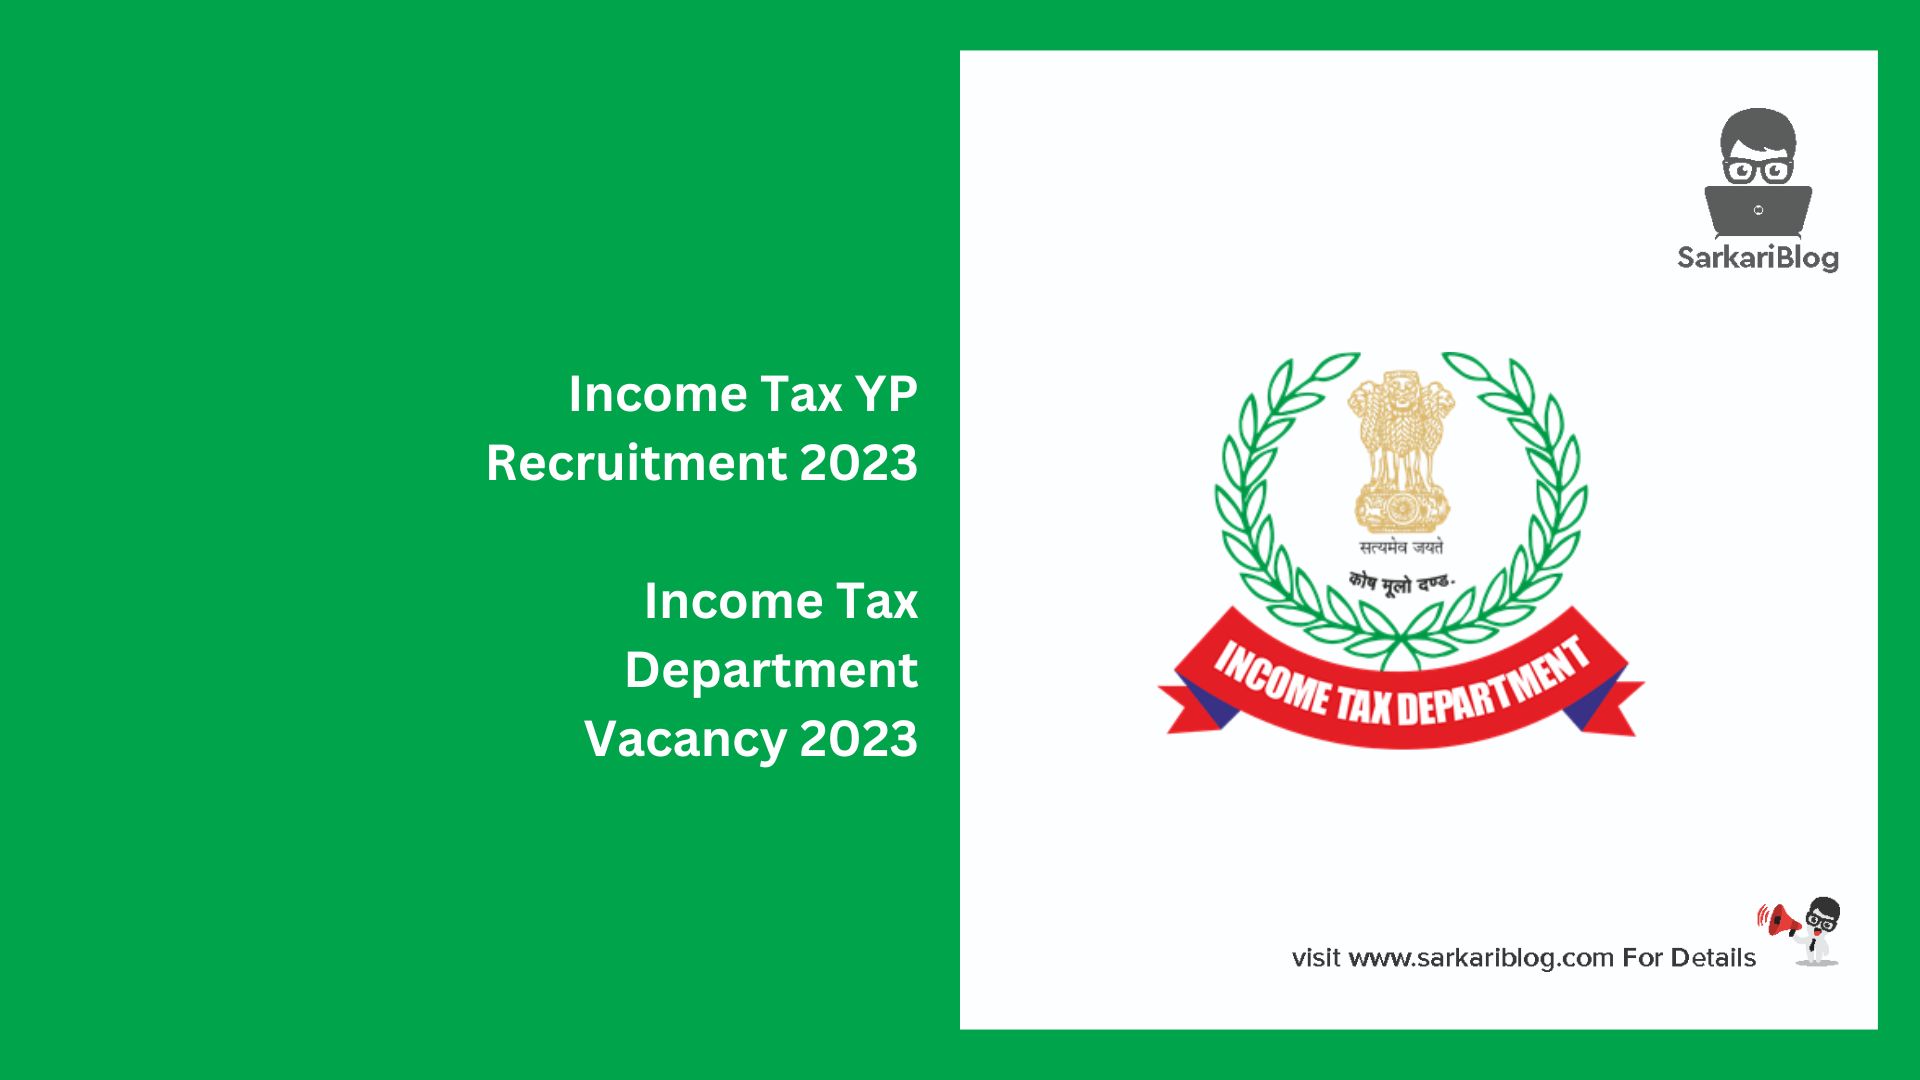 Income Tax YP Recruitment 2023